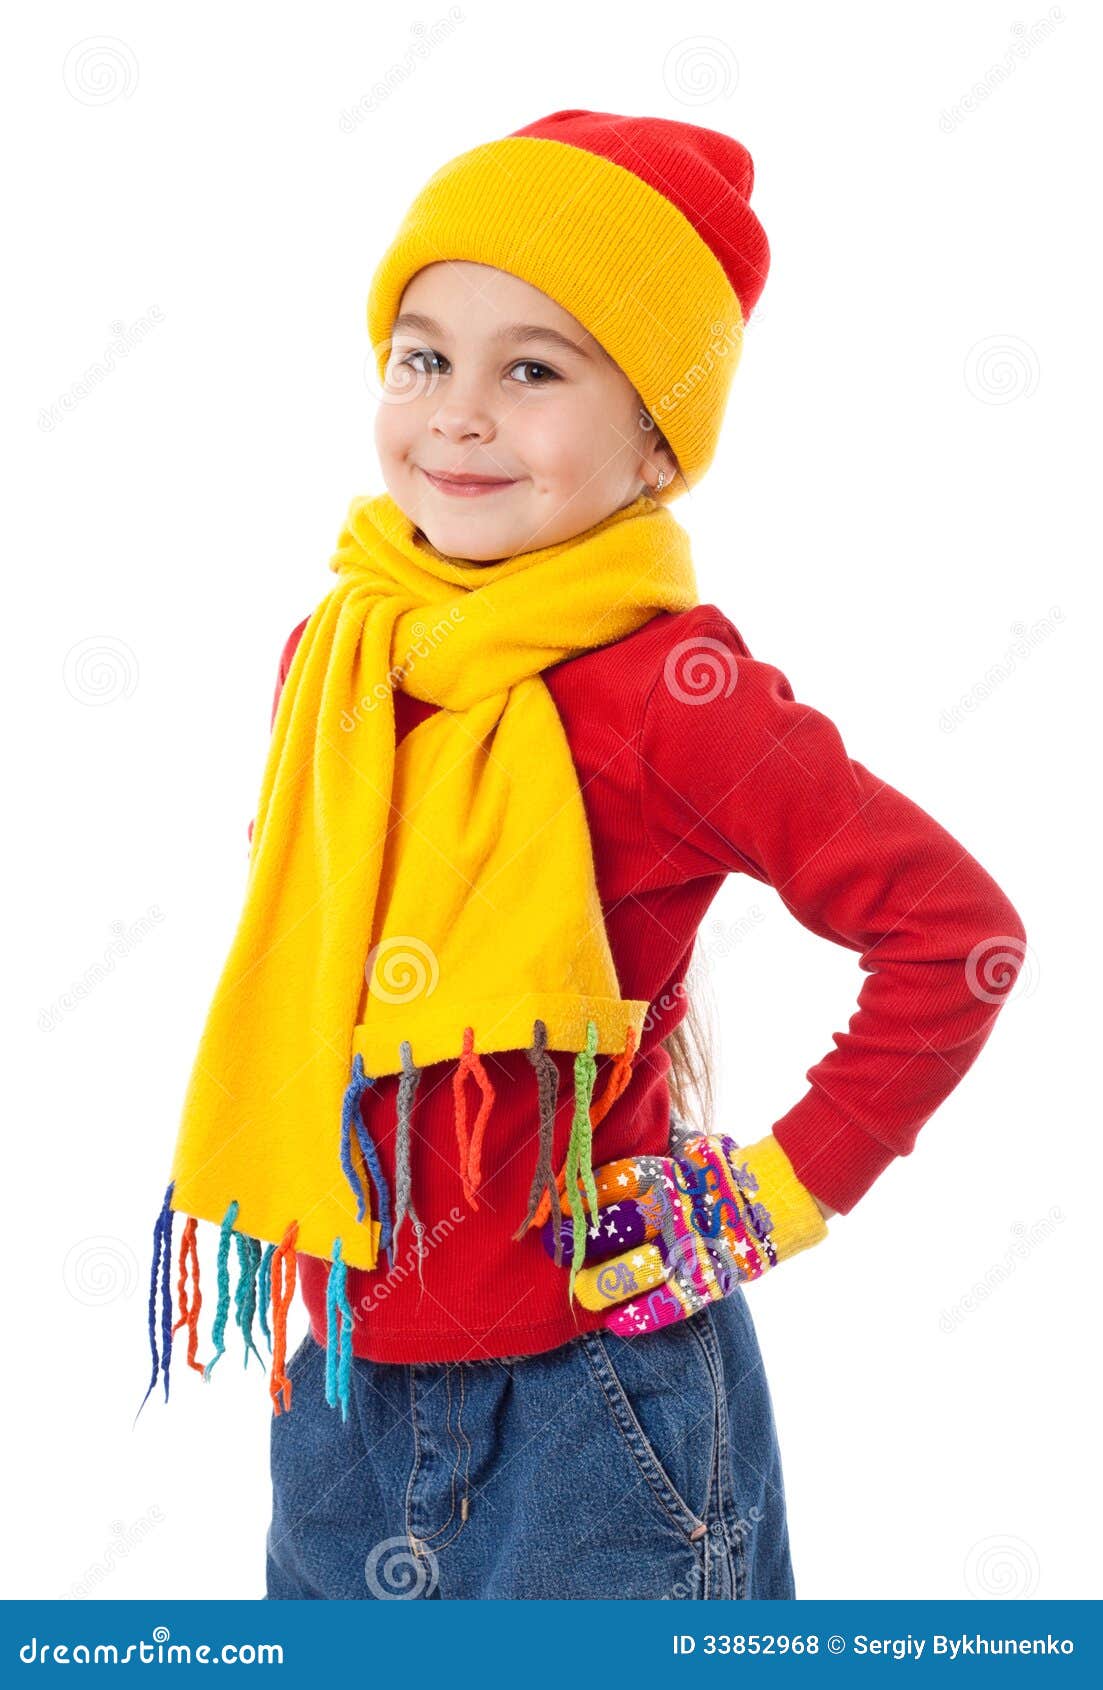 Girl in winter clothes stock photo. Image of winter, scarf - 33852968